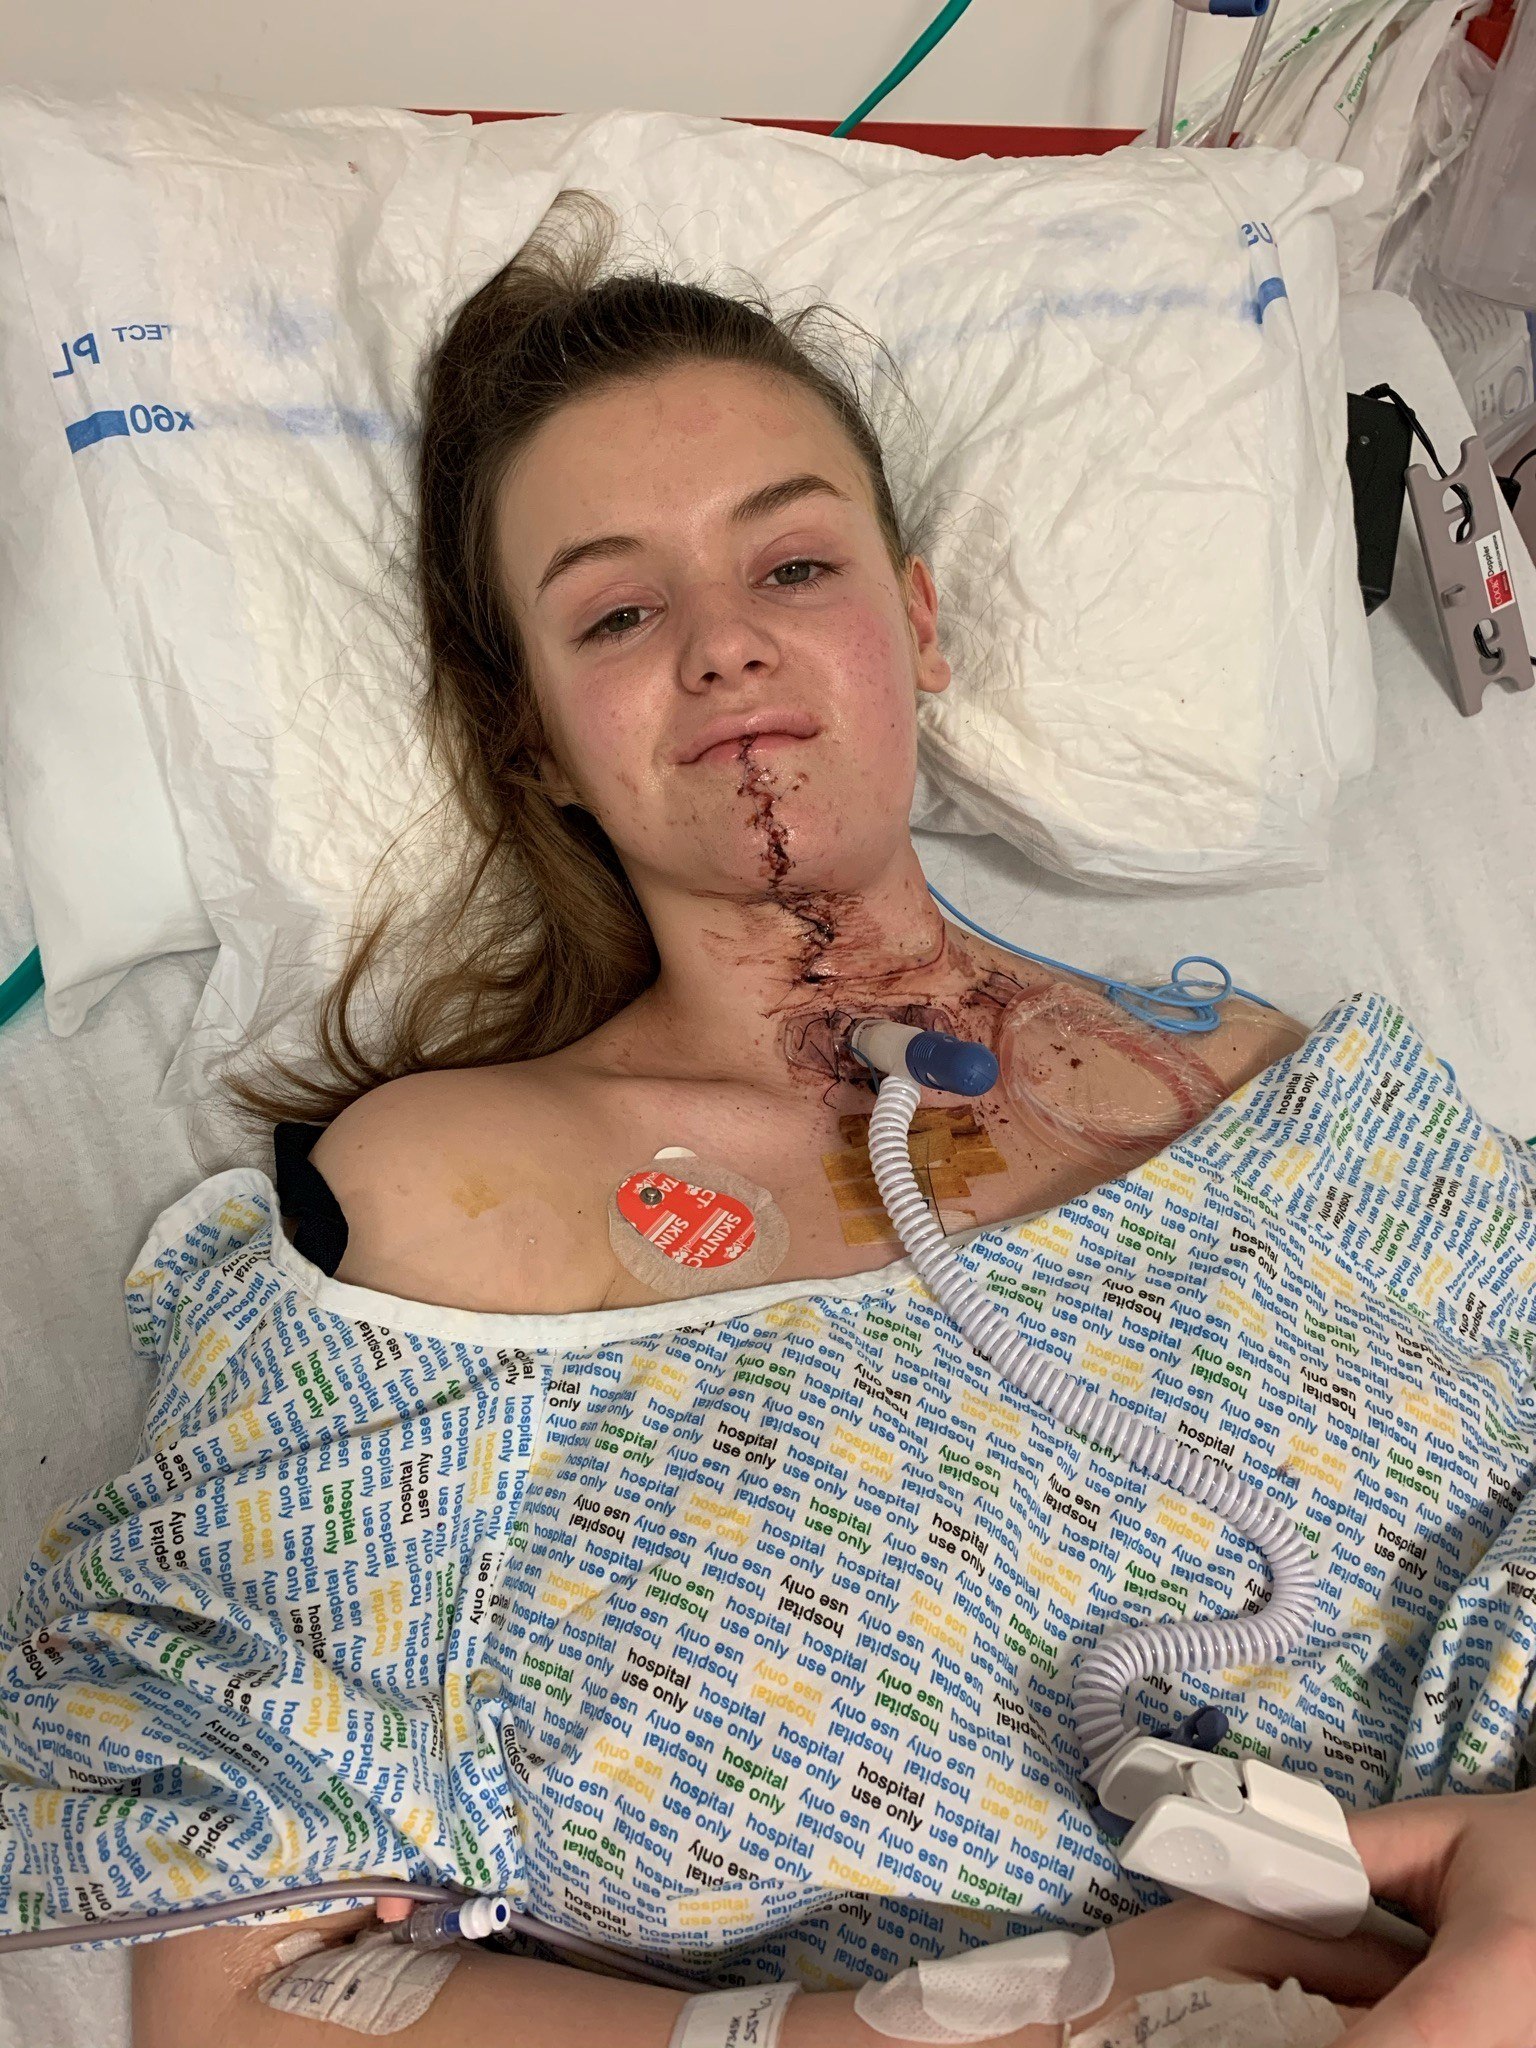 Rachel, who was in her second year of university, was rushed into surgery for a 16-hour operation.